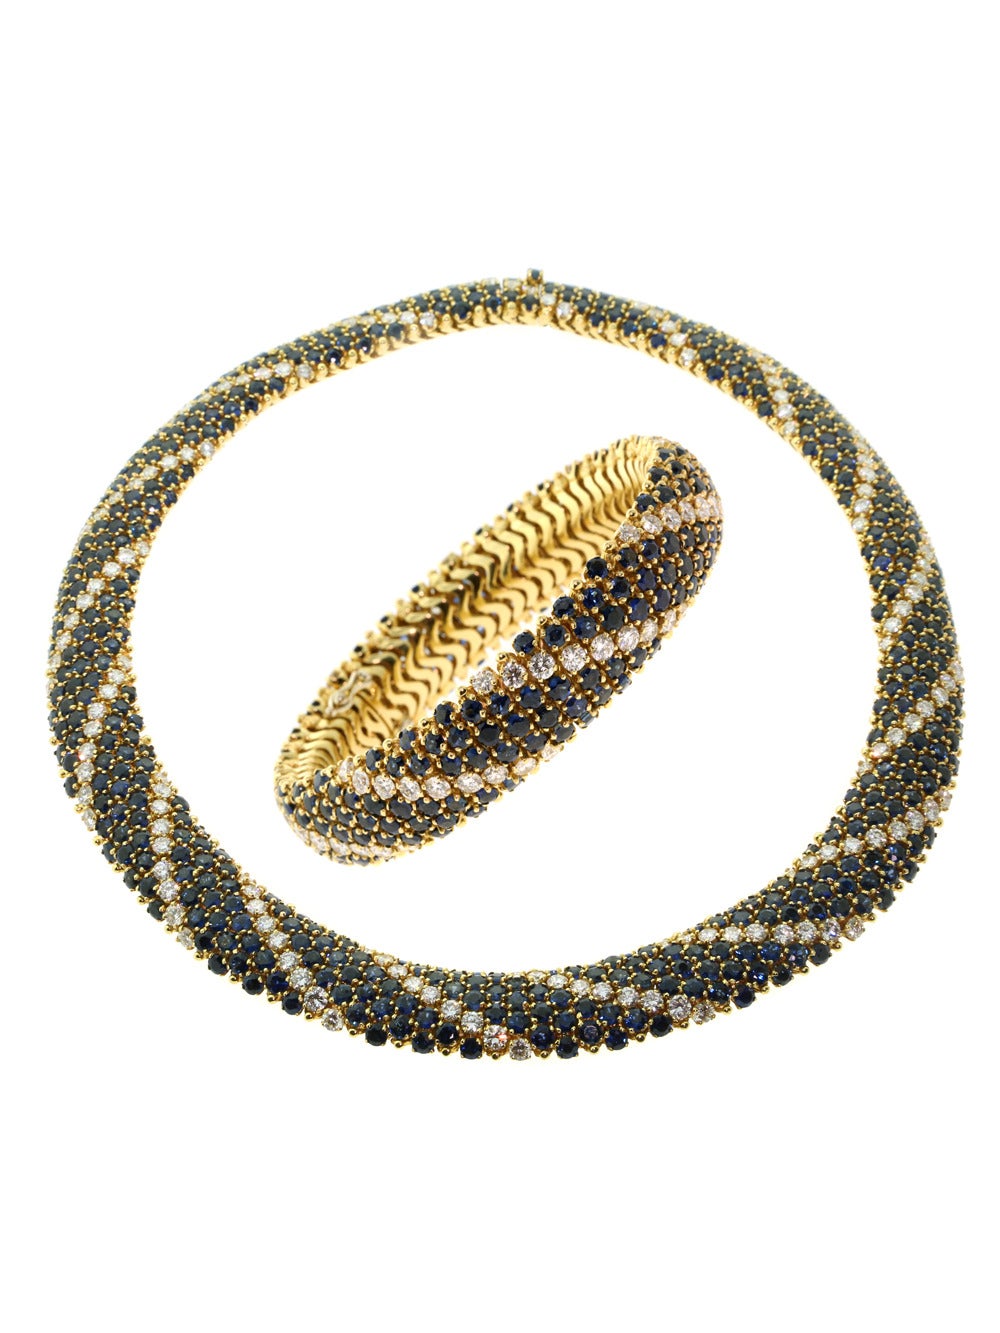 Achieve true aesthetic affluence with this stunning 18k Yellow Gold Bracelet & Necklace Set from Cartier! Boasting a jaw-dropping 103ct of brilliant blue Sapphires plus an astonishing 22ct of dazzling Diamonds, this impeccable matching Set truly is